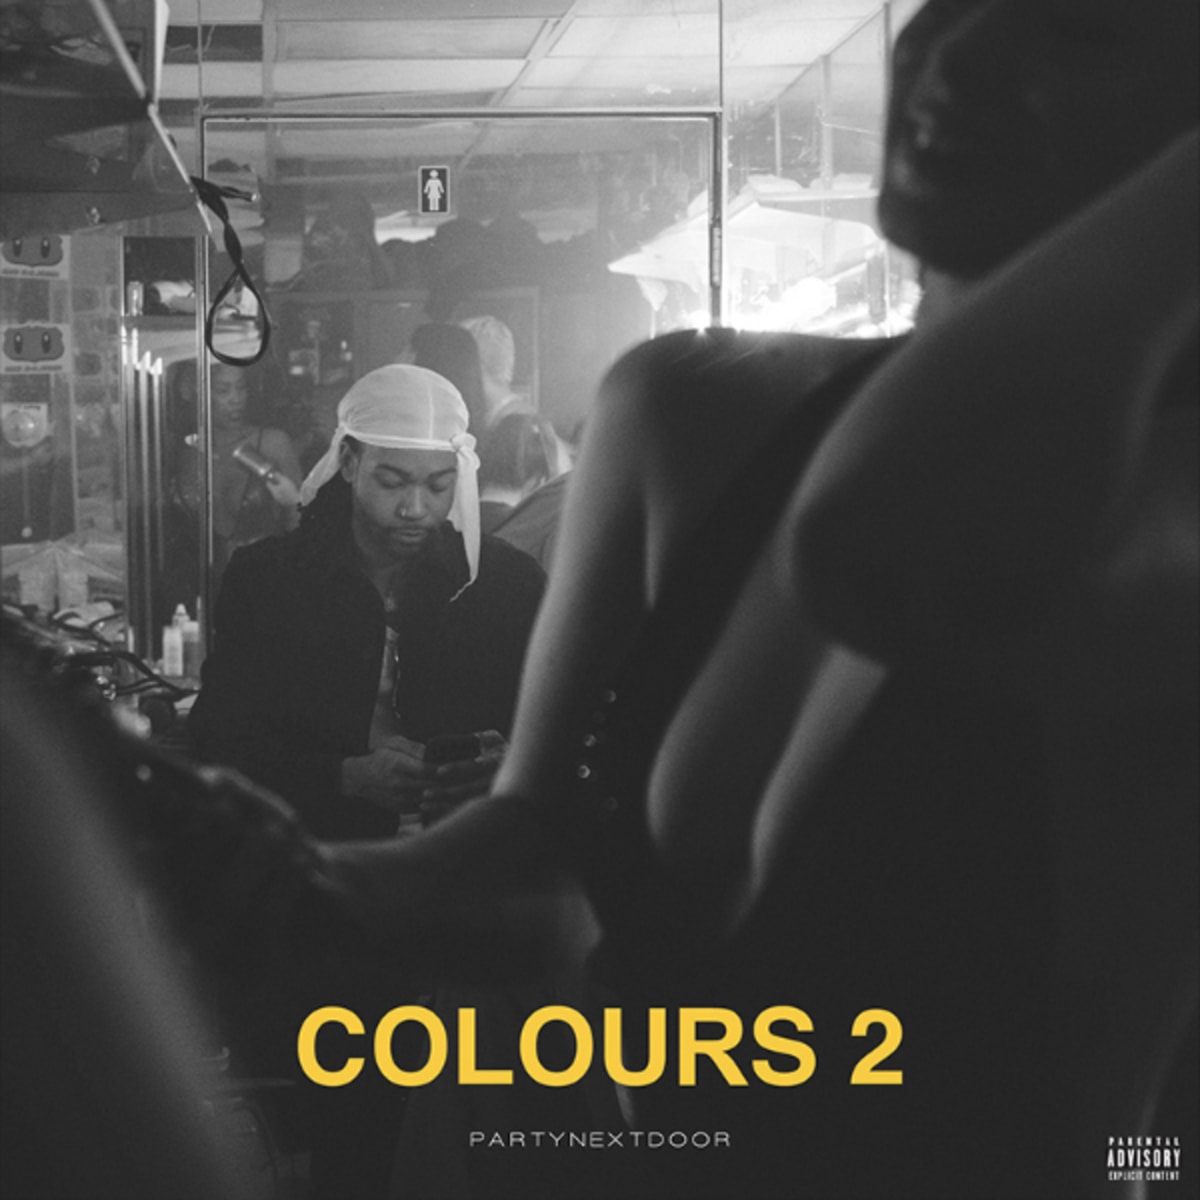 Partynextdoor and G. Ry Release 'Colours 2' EP | Complex
